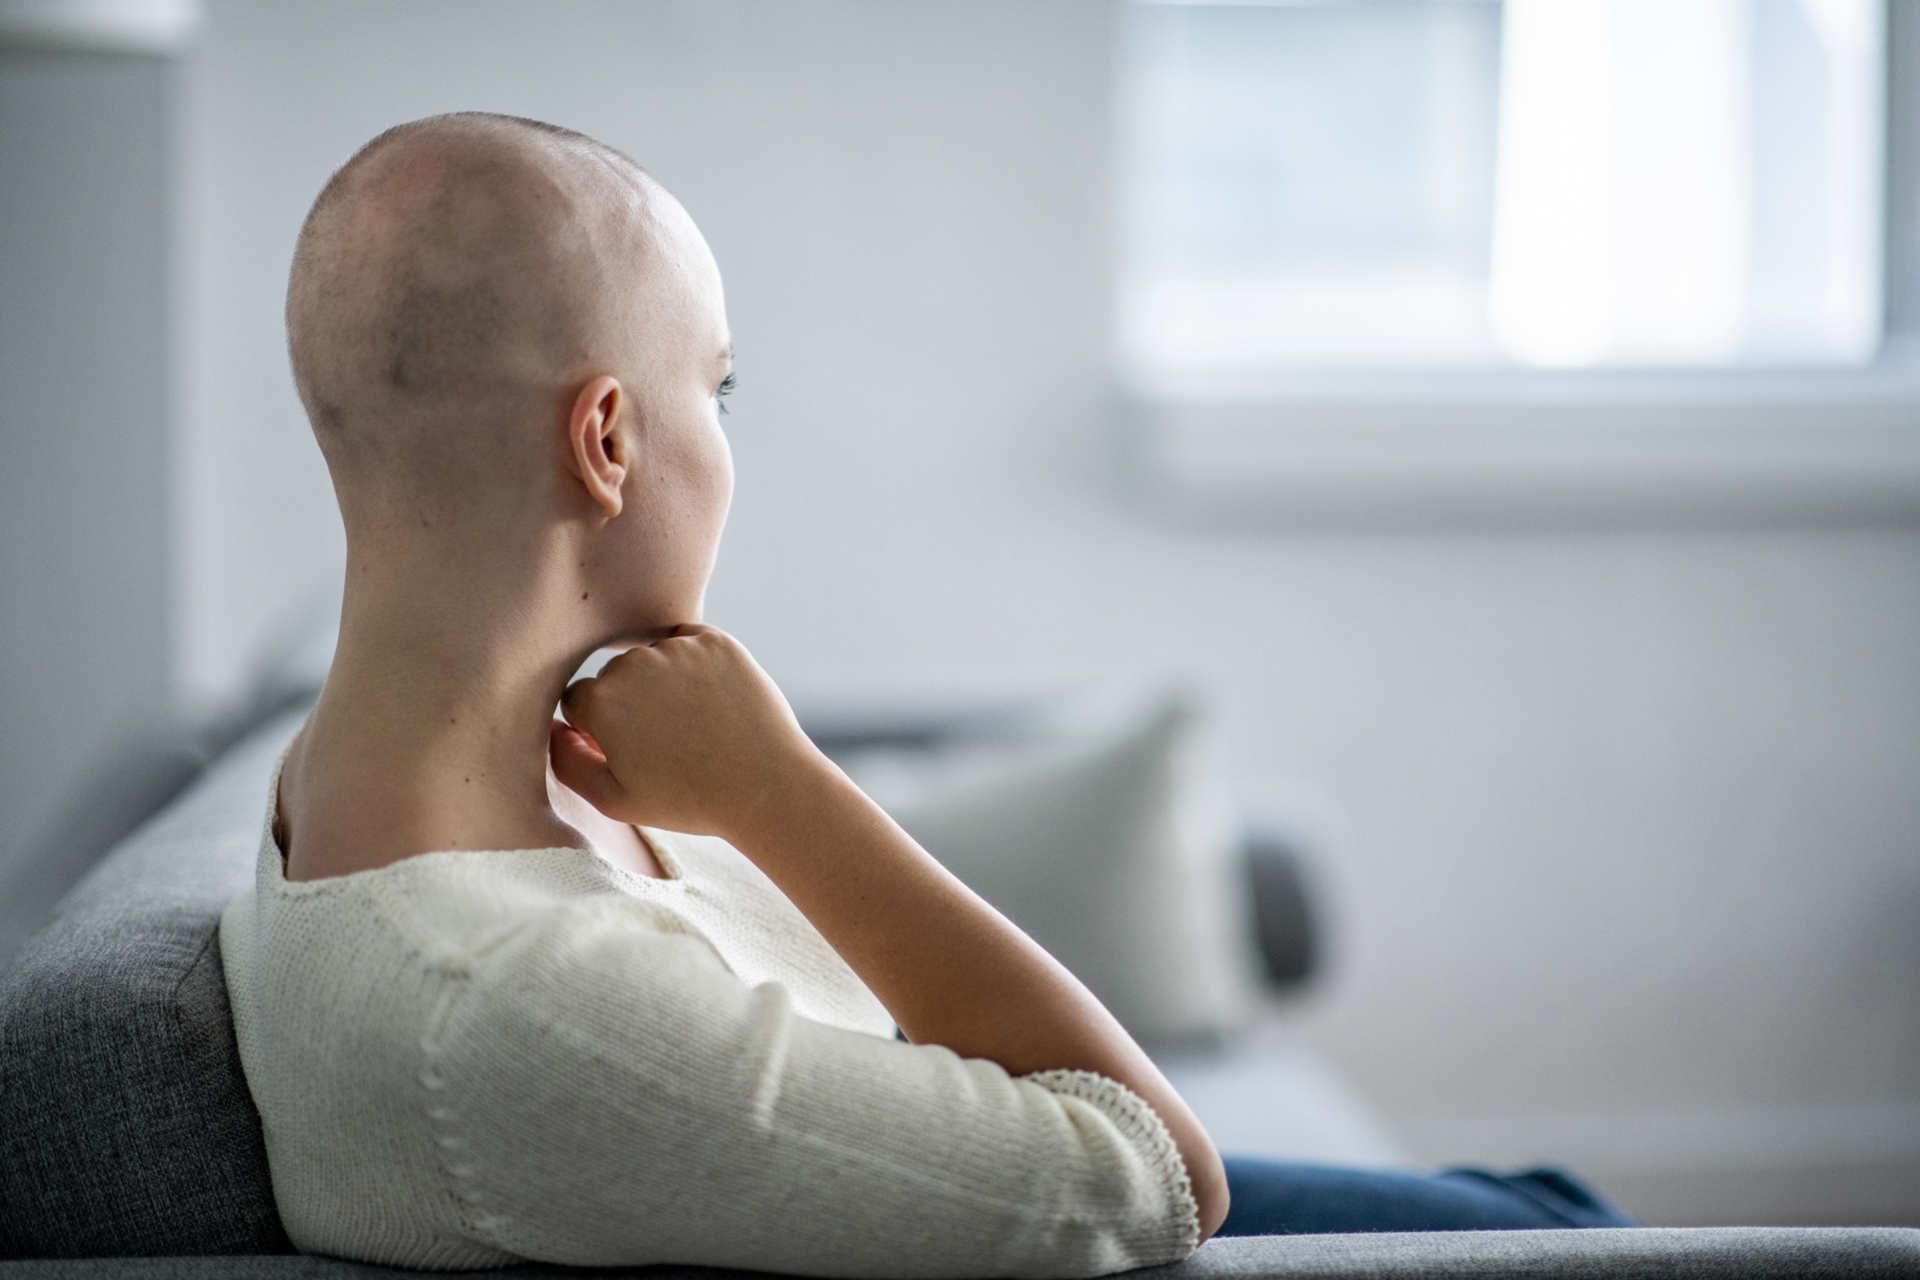 What are the Symptoms of Cancer and the Treatment for Cancer?